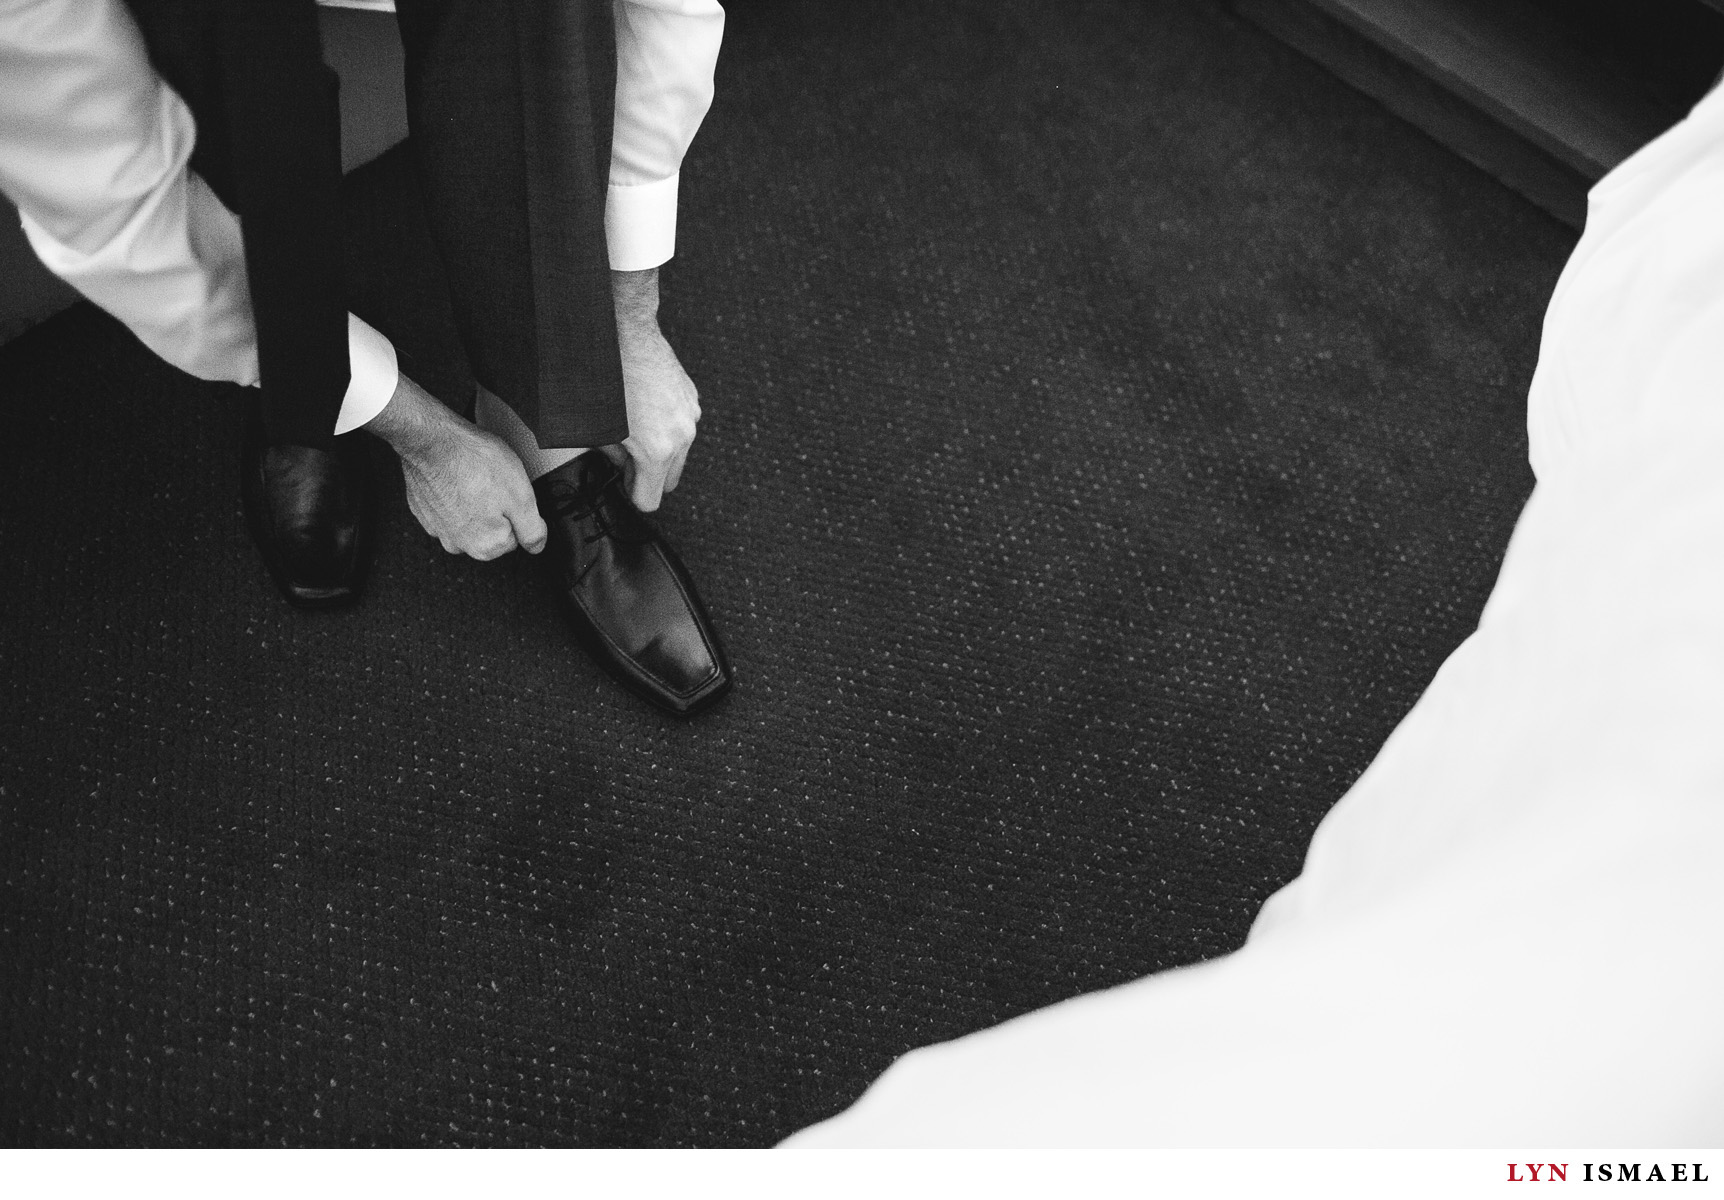 The groom puts his shoes on